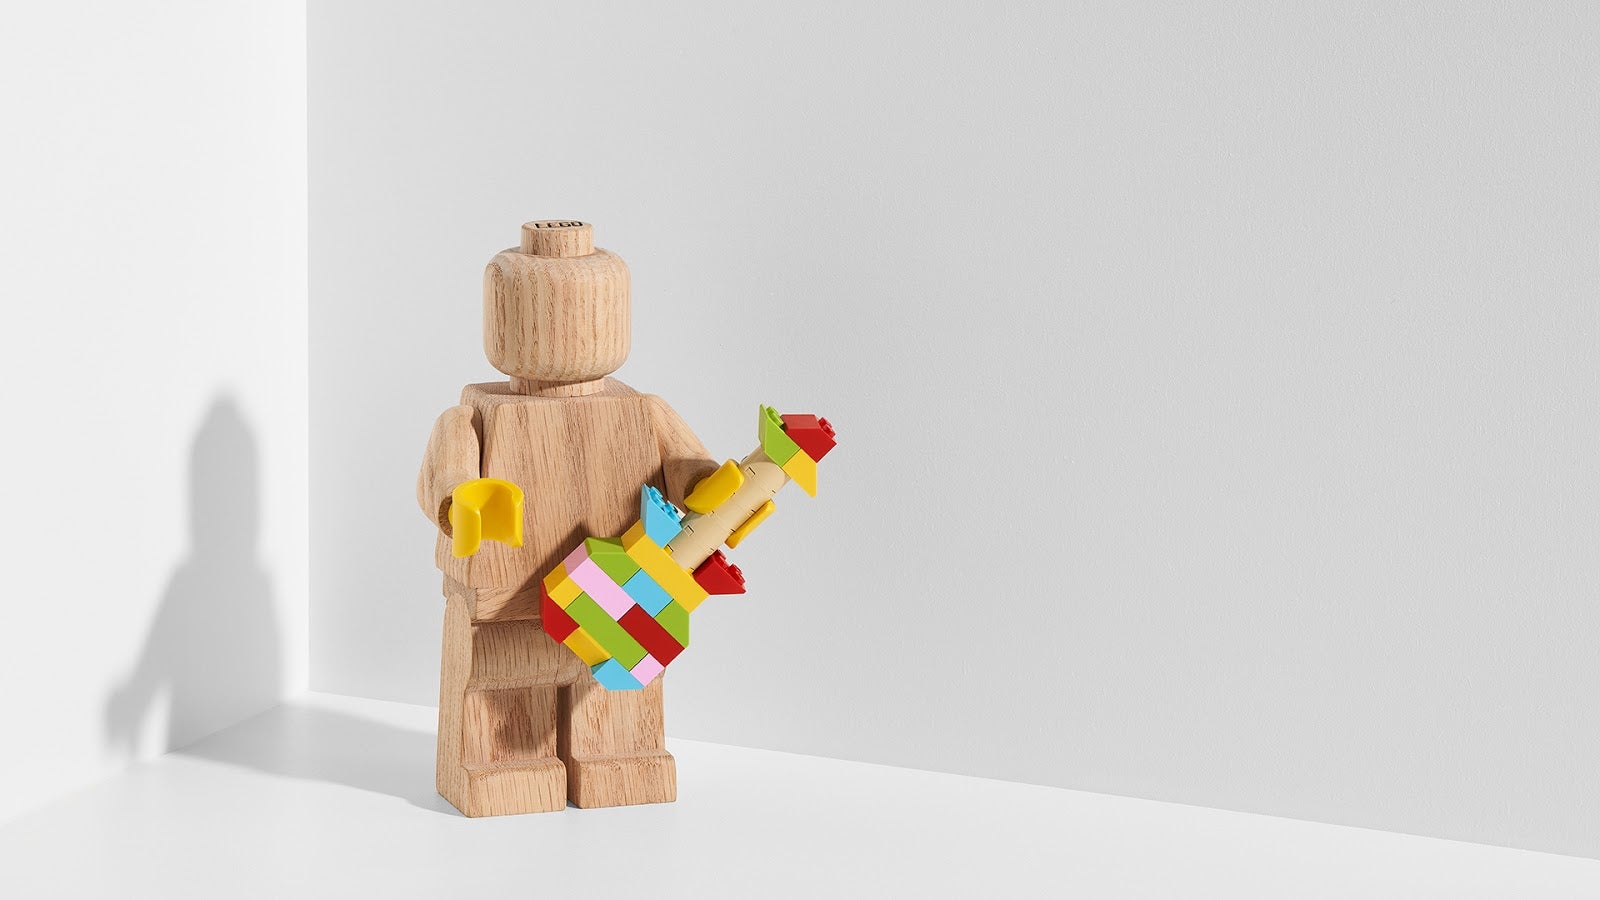 Lego Pays Homage To Its Heritage With A Wonderful Wooden Minifig